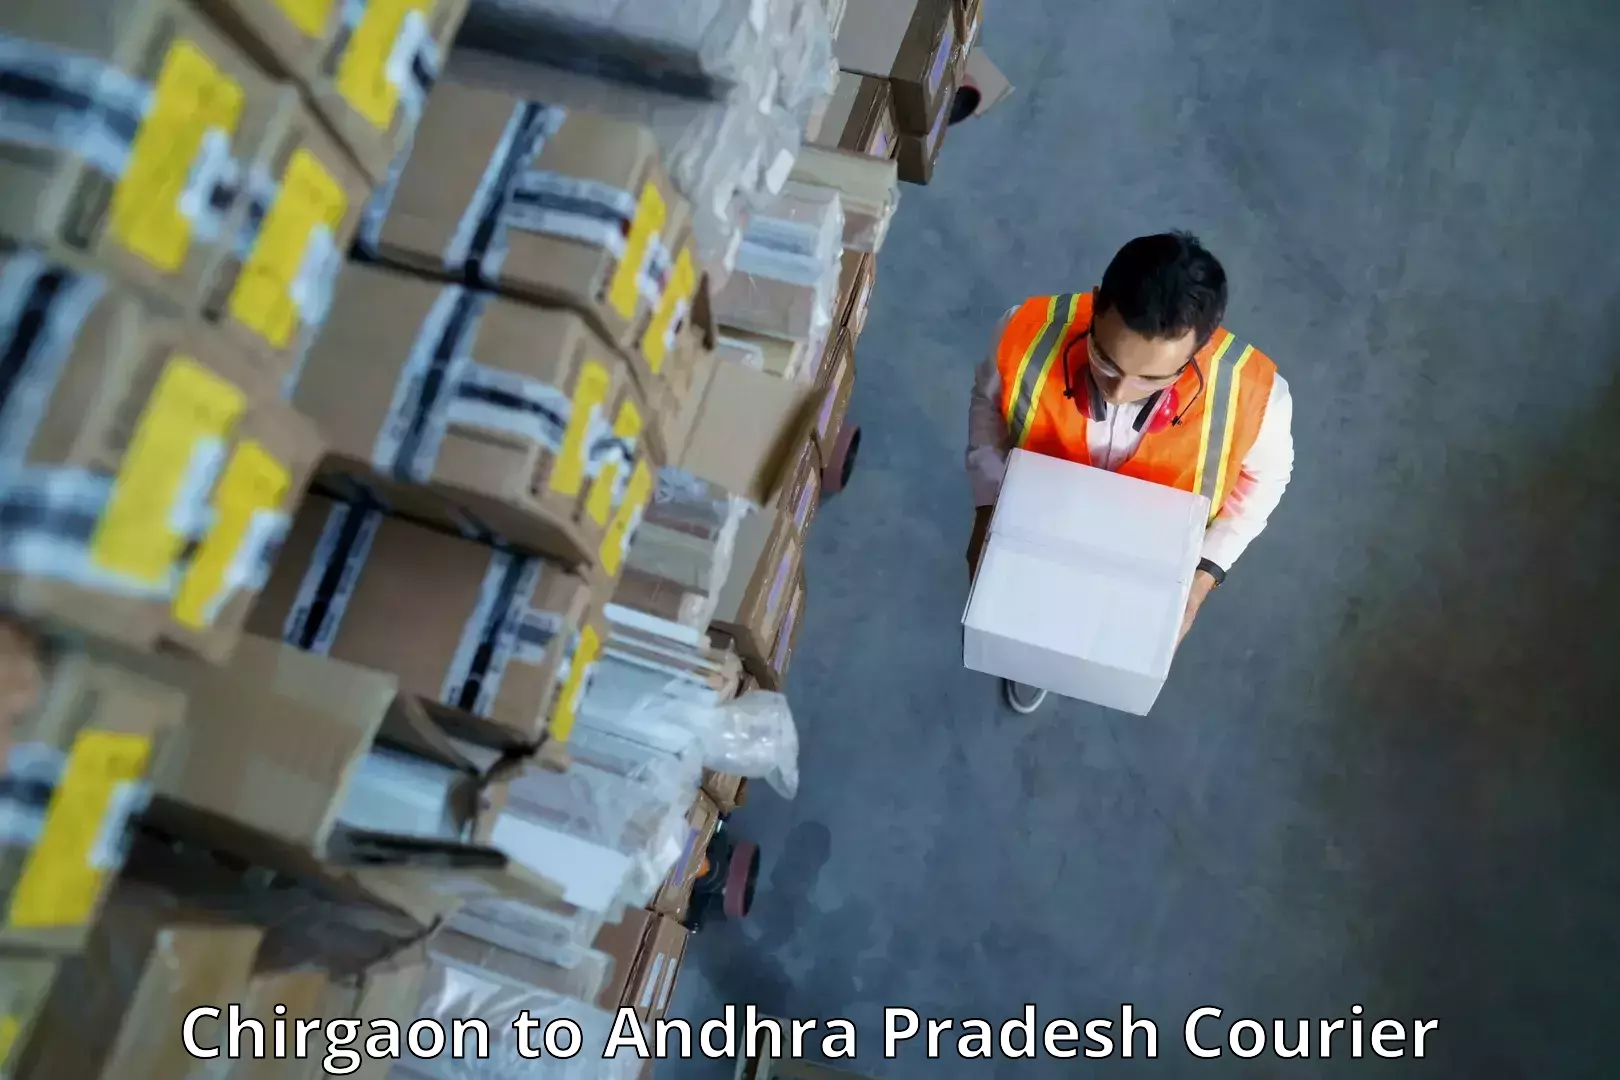 Custom courier packages in Chirgaon to Visakhapatnam Port